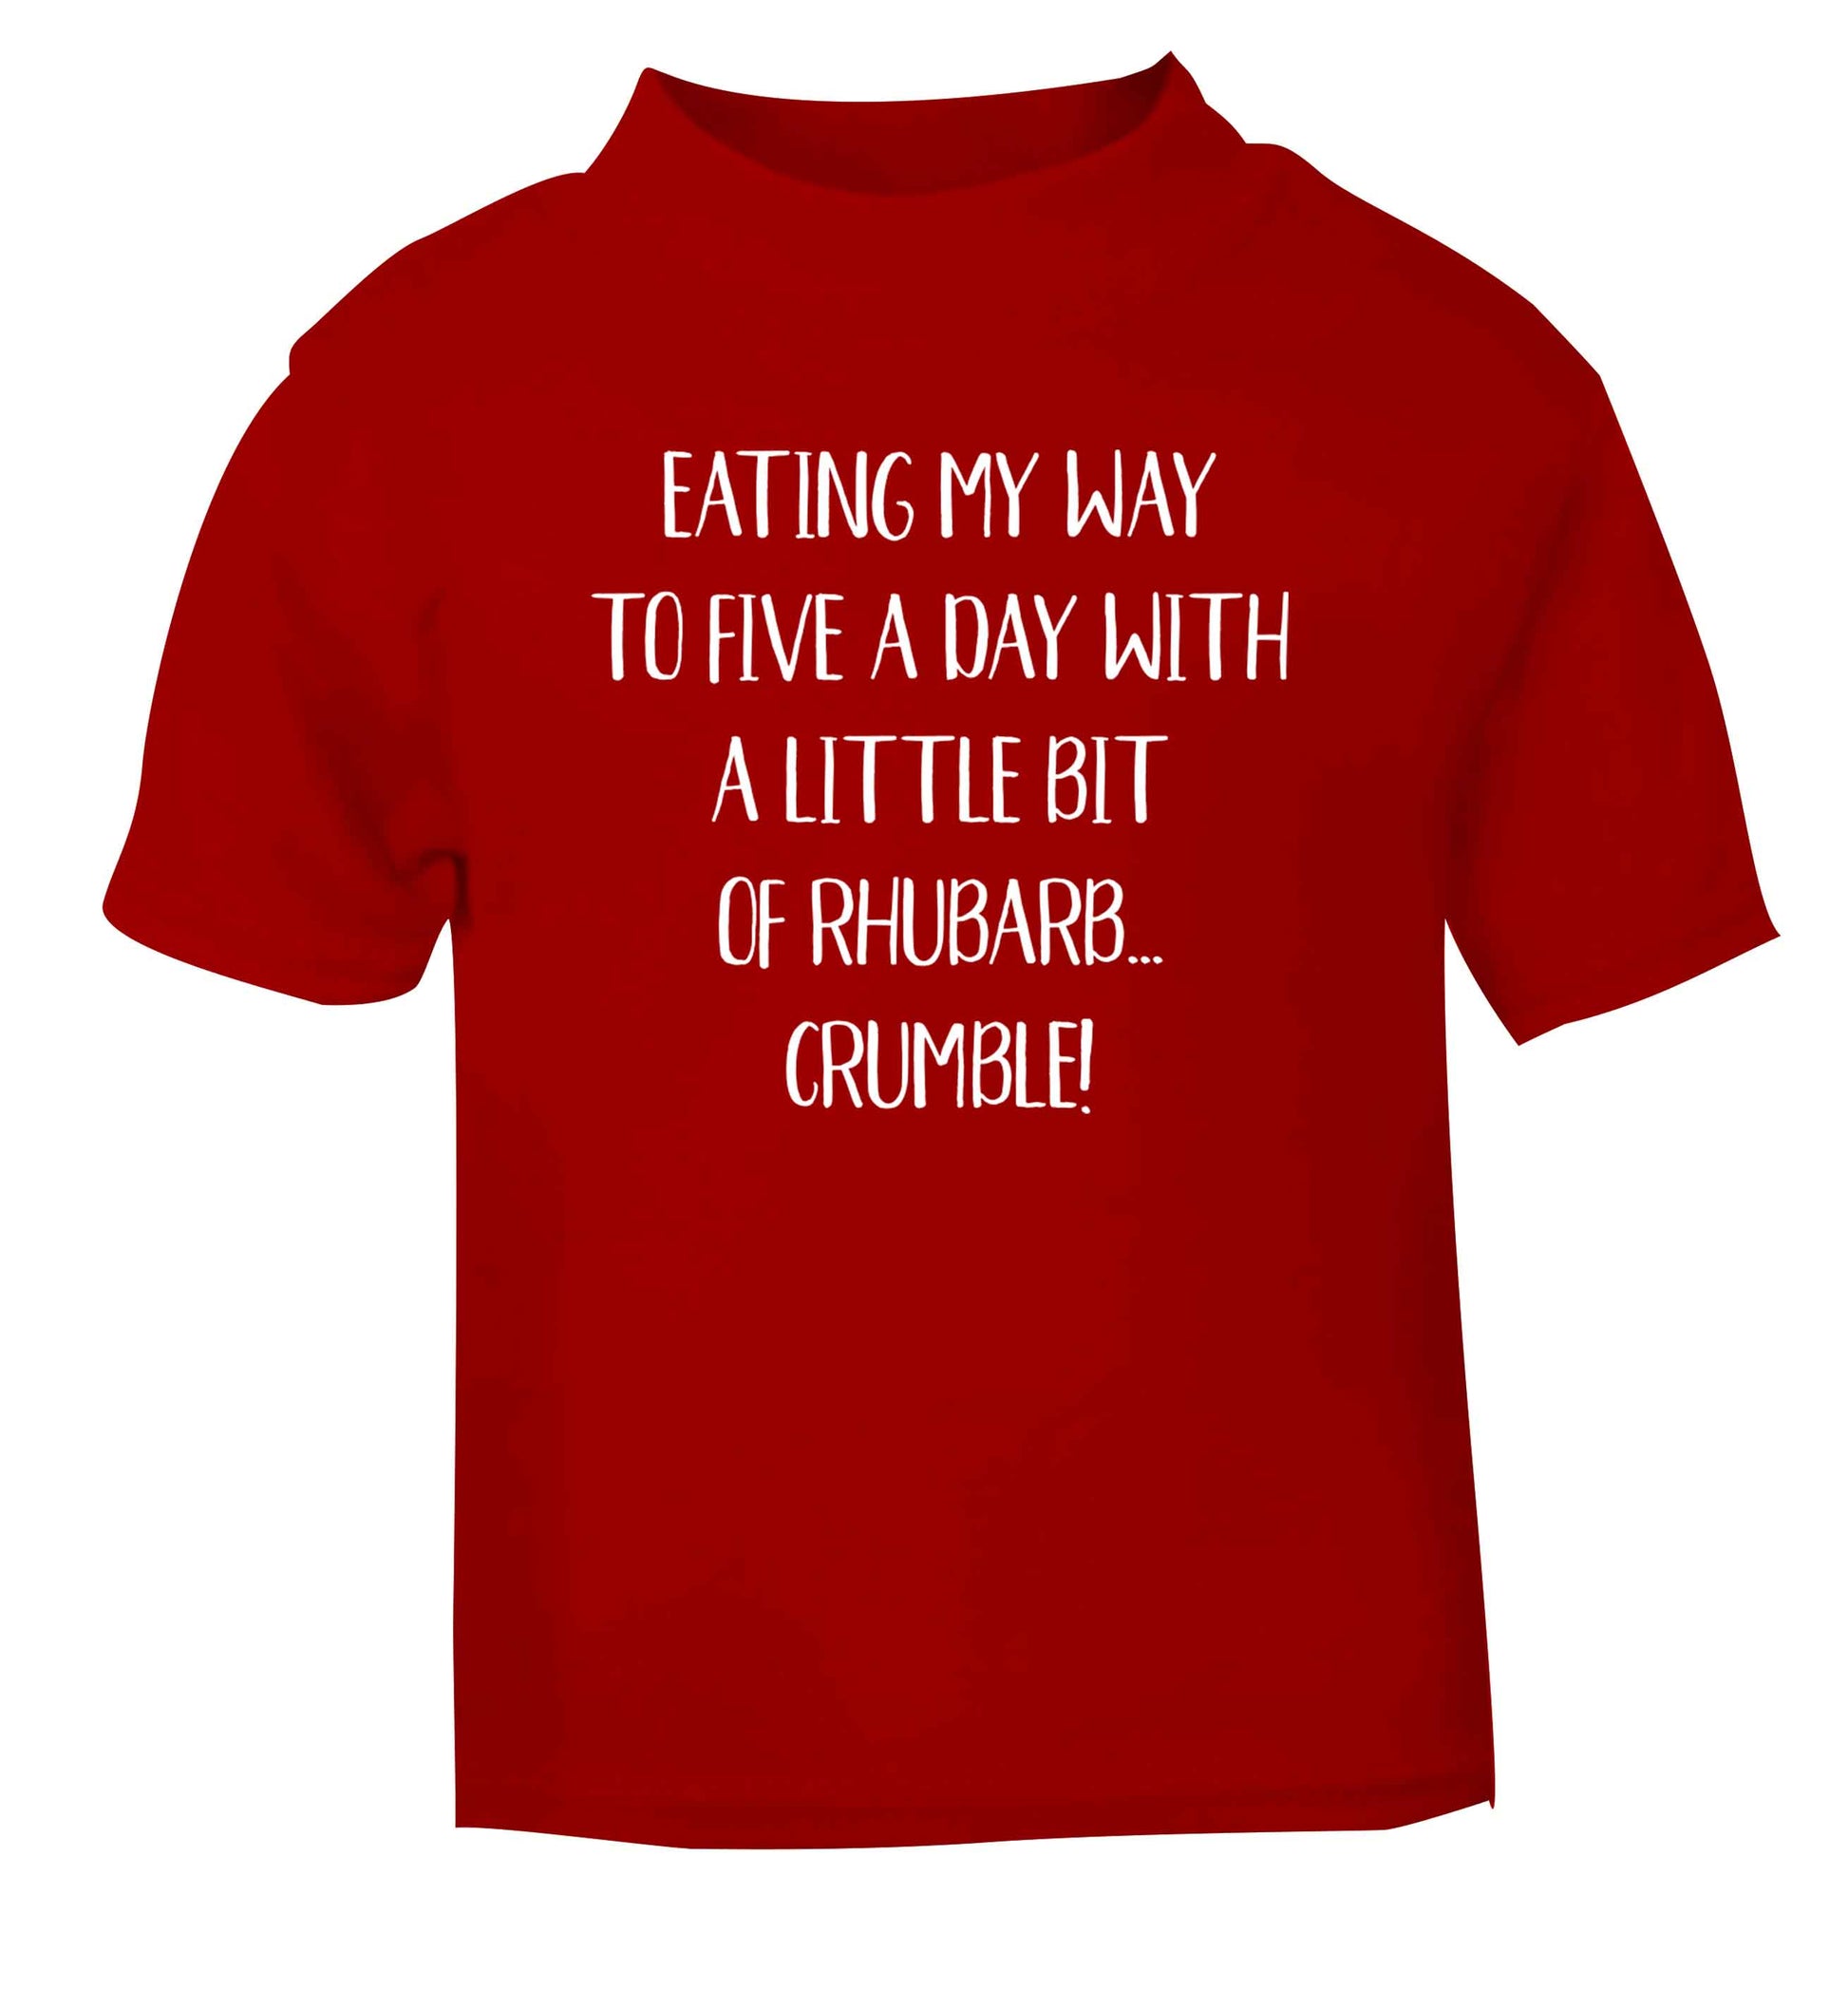 Eating my way to five a day with a little bit of rhubarb crumble red Baby Toddler Tshirt 2 Years